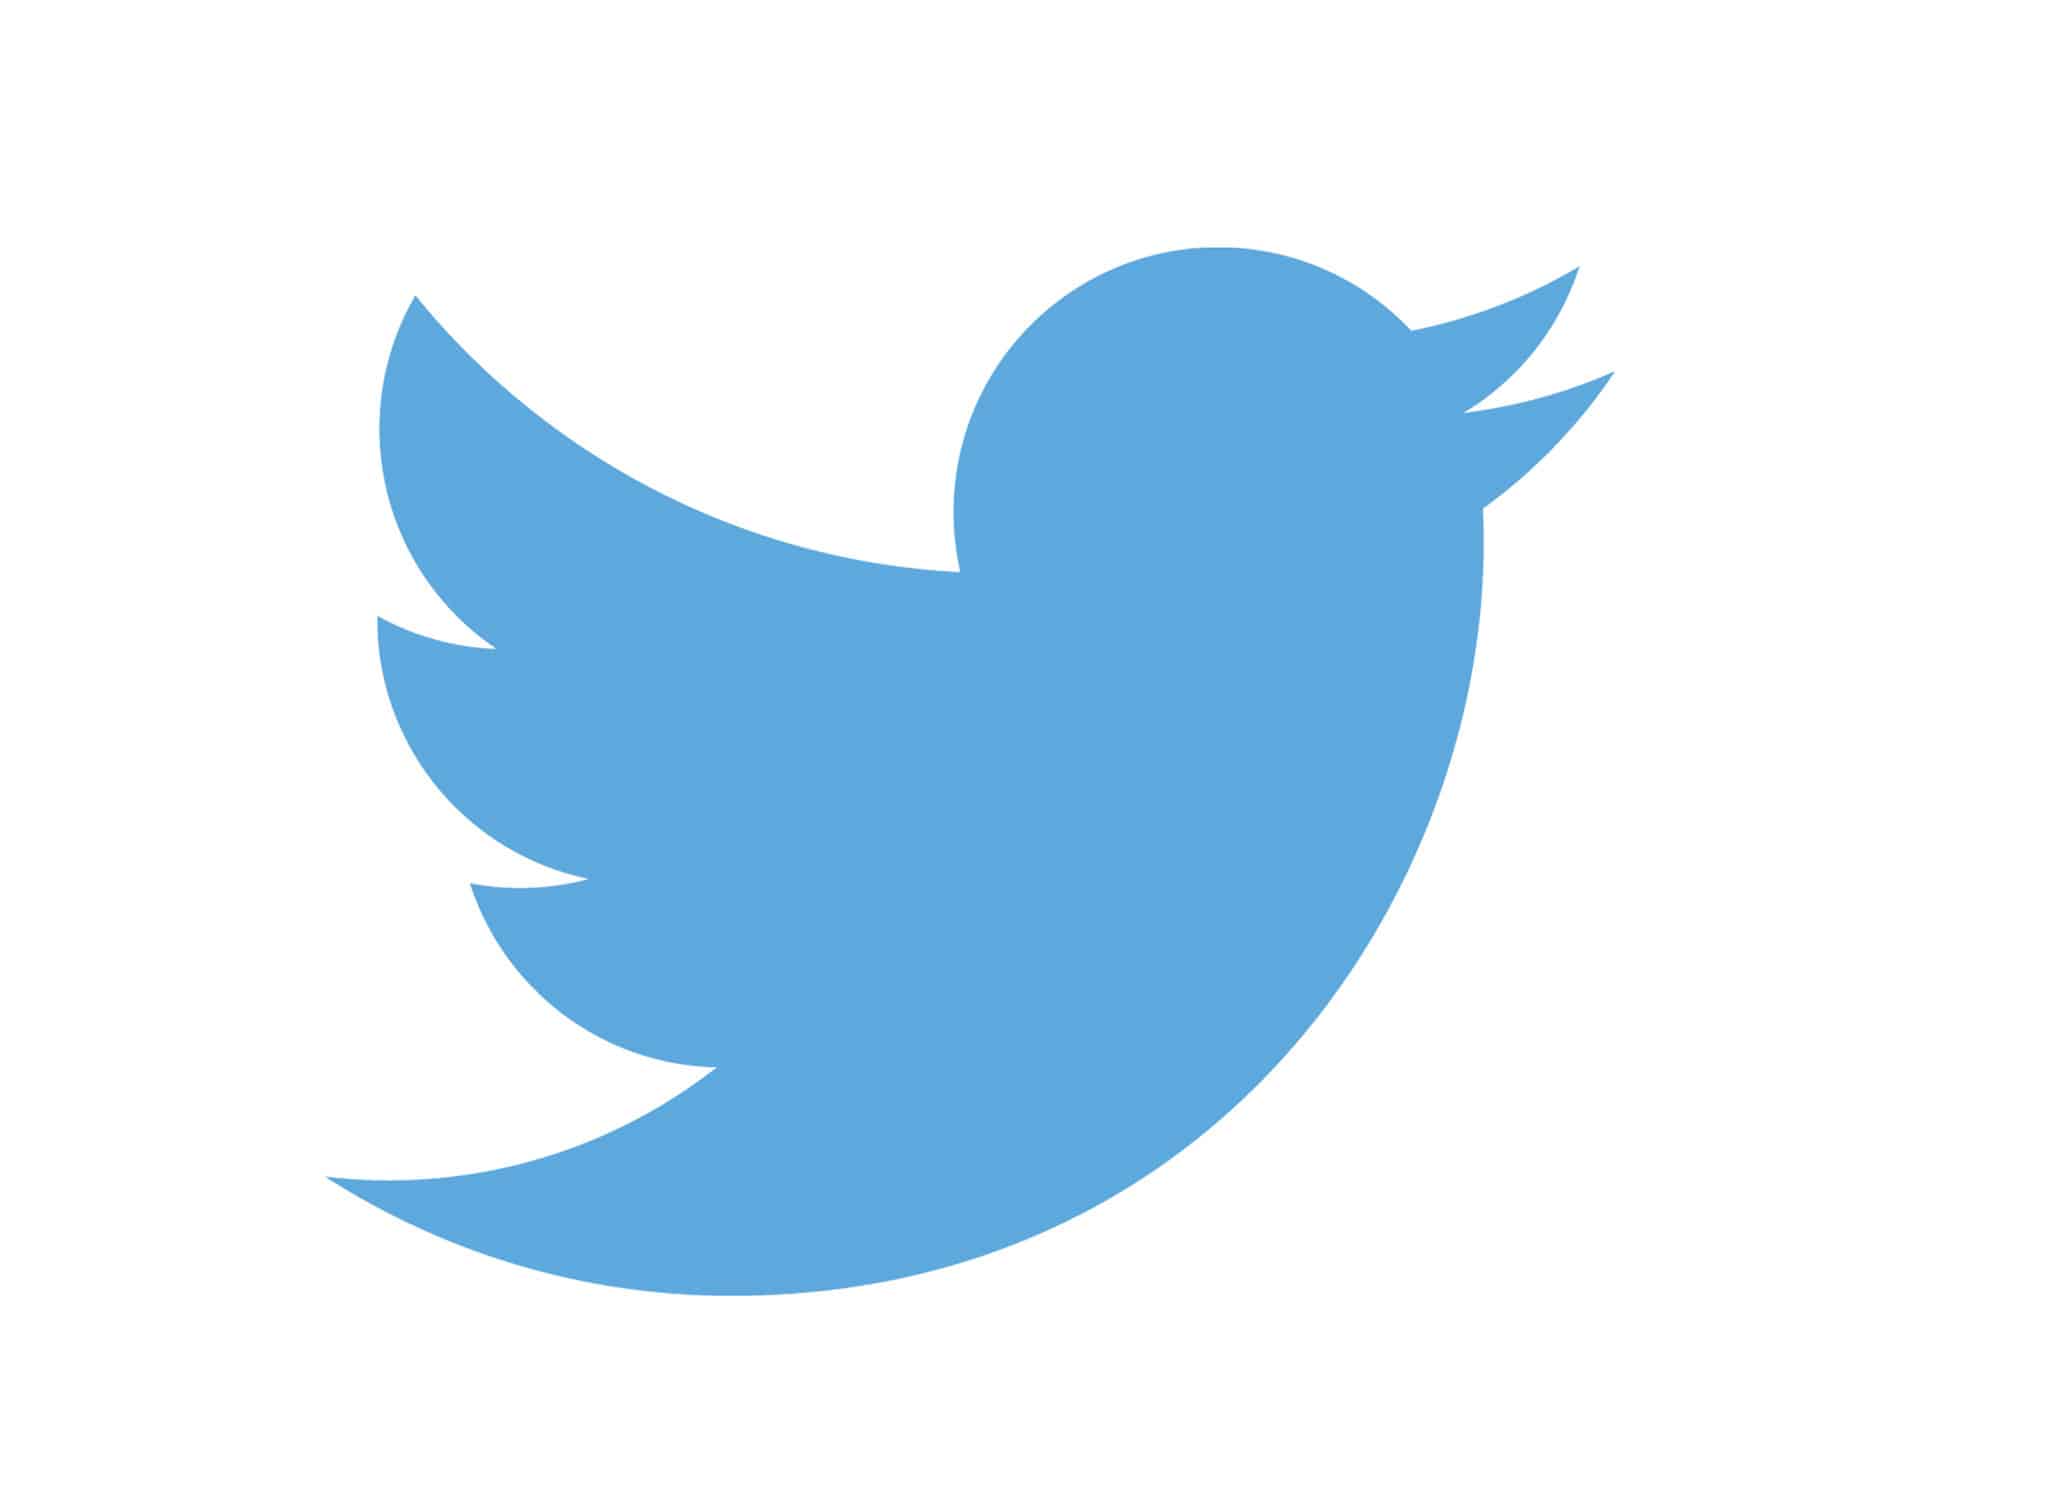 Twitter seeks to under India’s legal system: MeitY